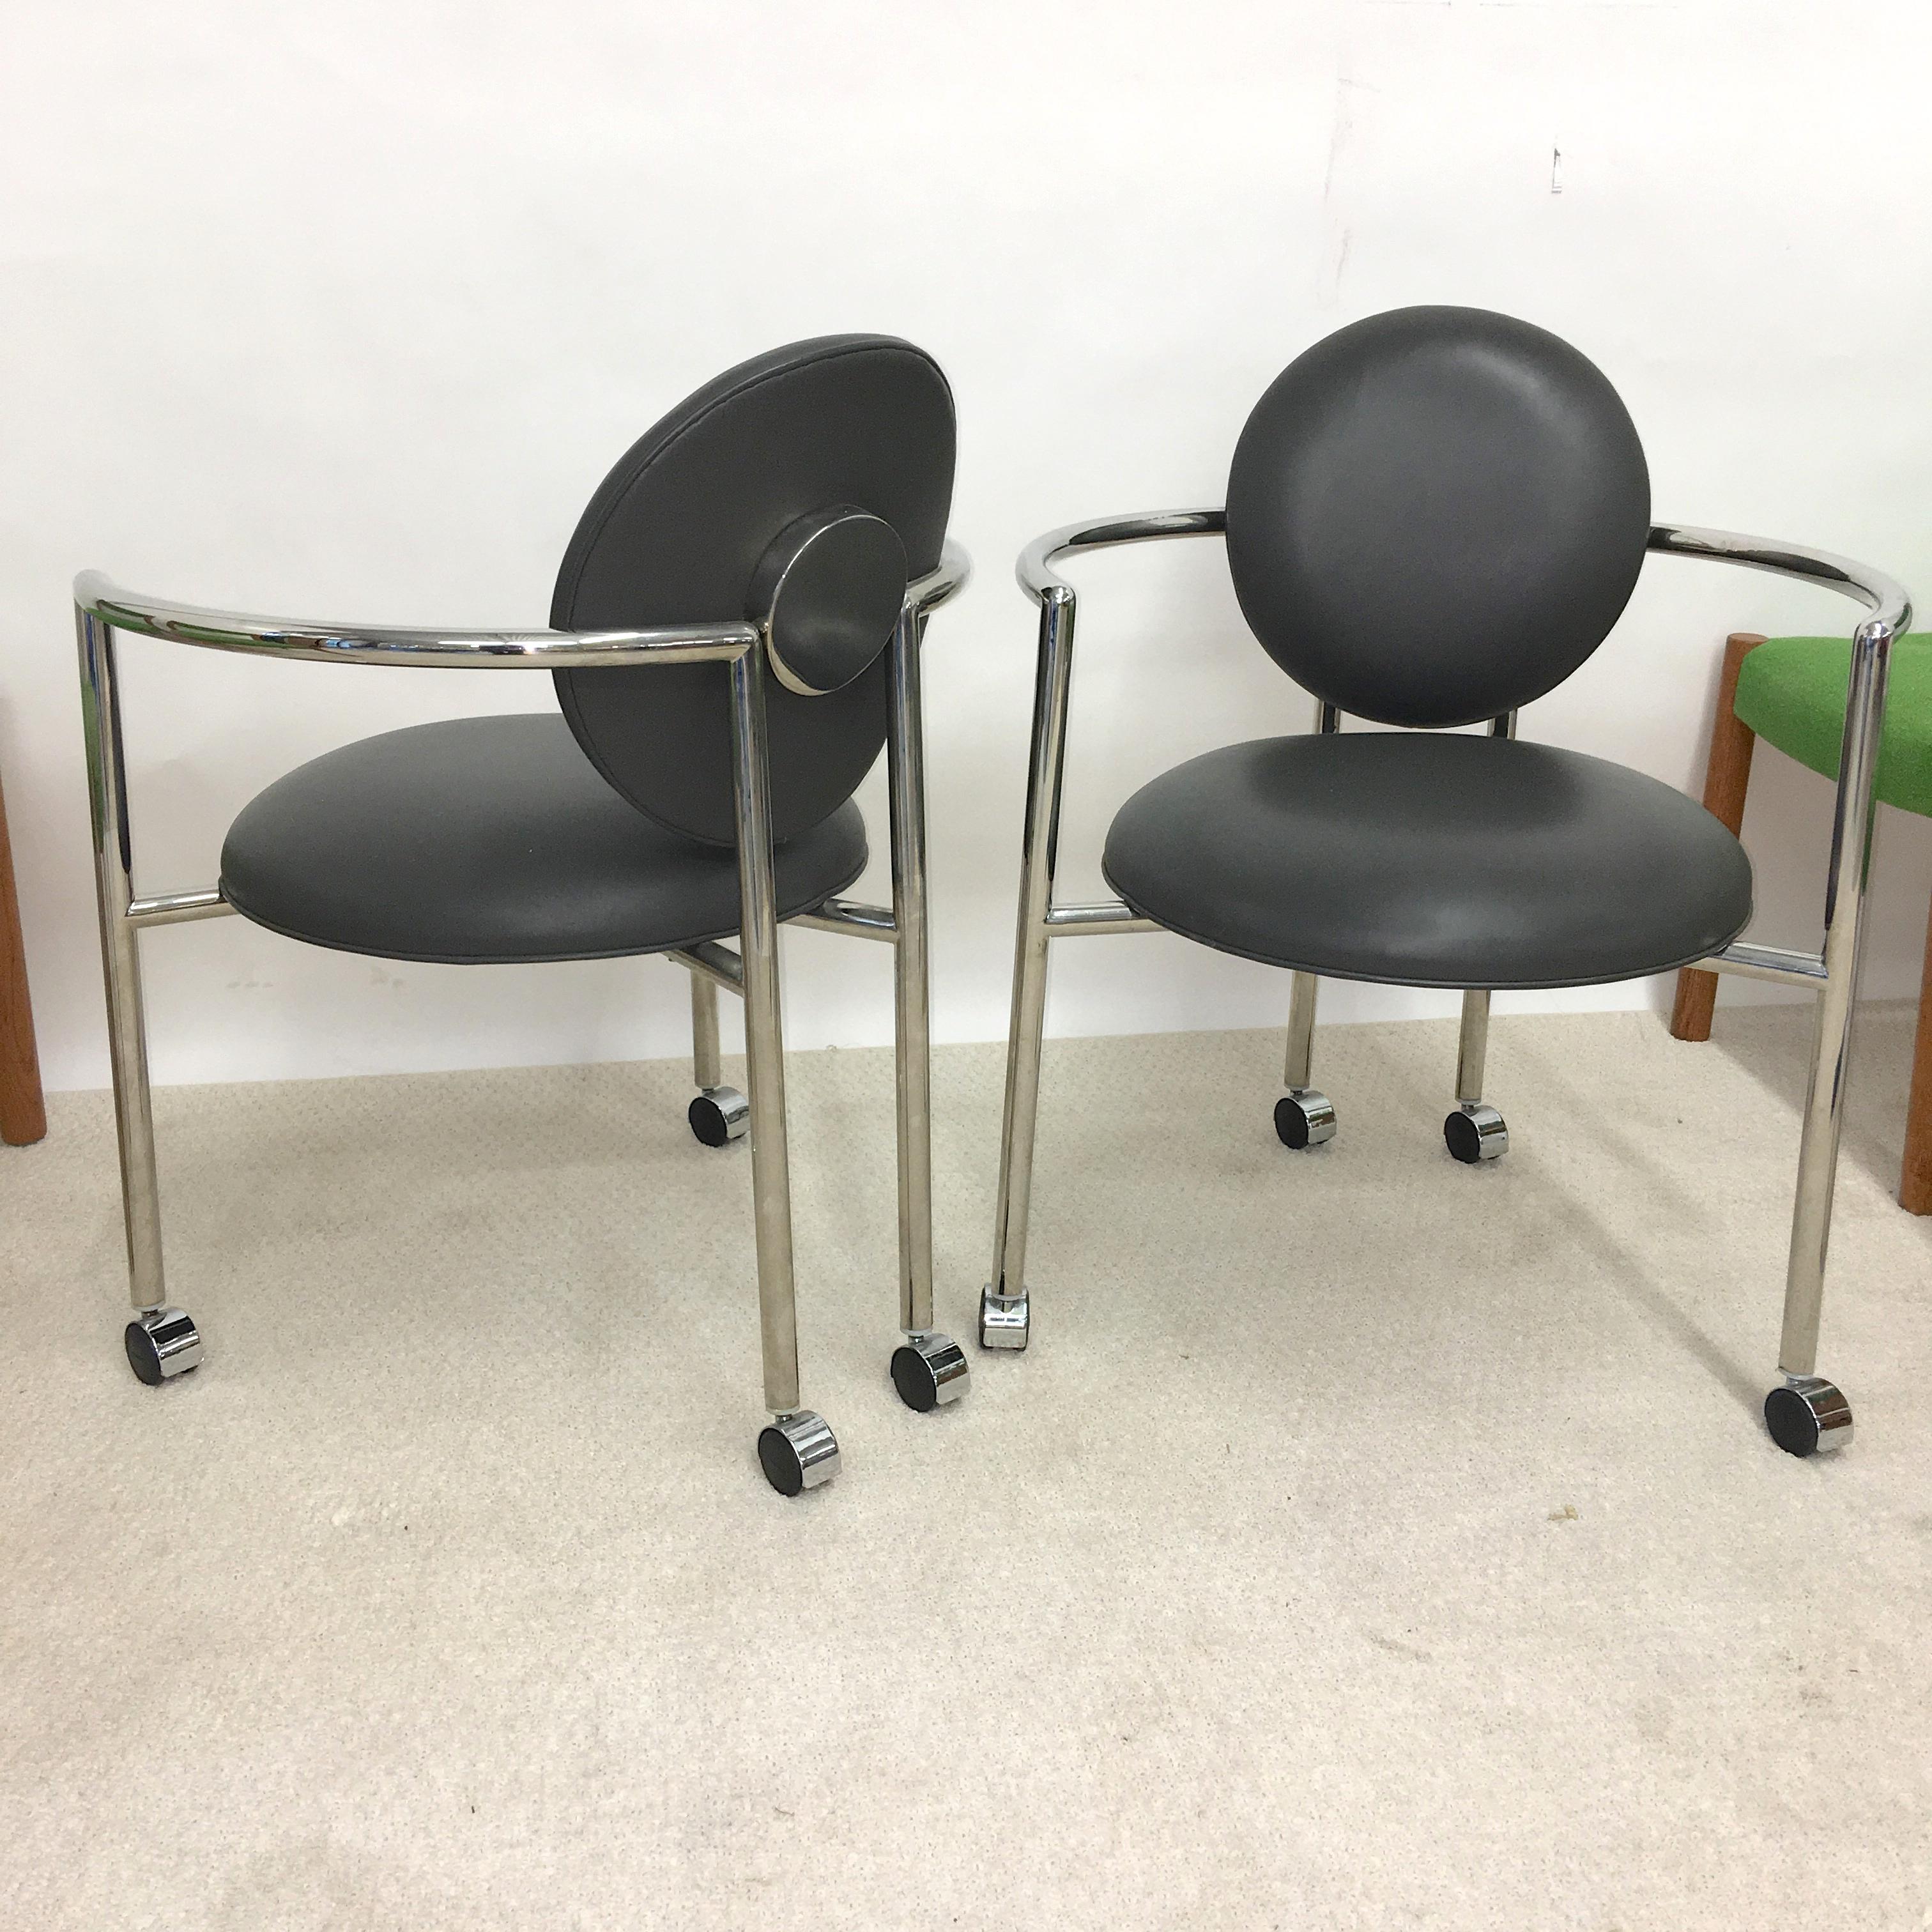 Pair of Moon Chairs by Stanley Jay Friedman for Brueton (Leder)